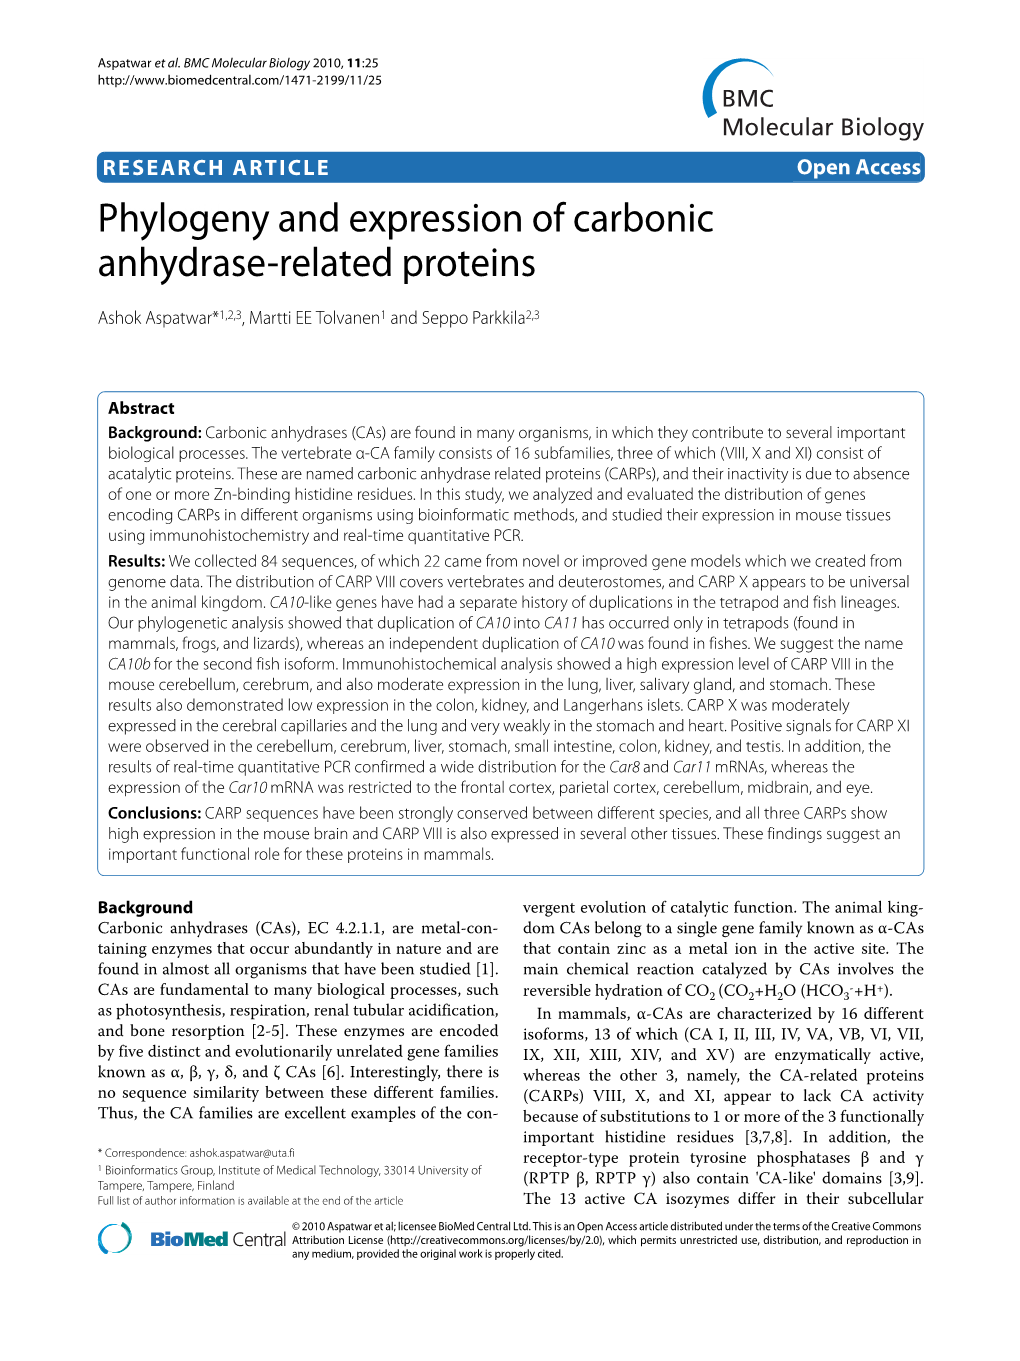 Phylogeny and Expression of Carbonic Anhydrase-Related Proteins BMC Molecular Biology 2010, 11:25